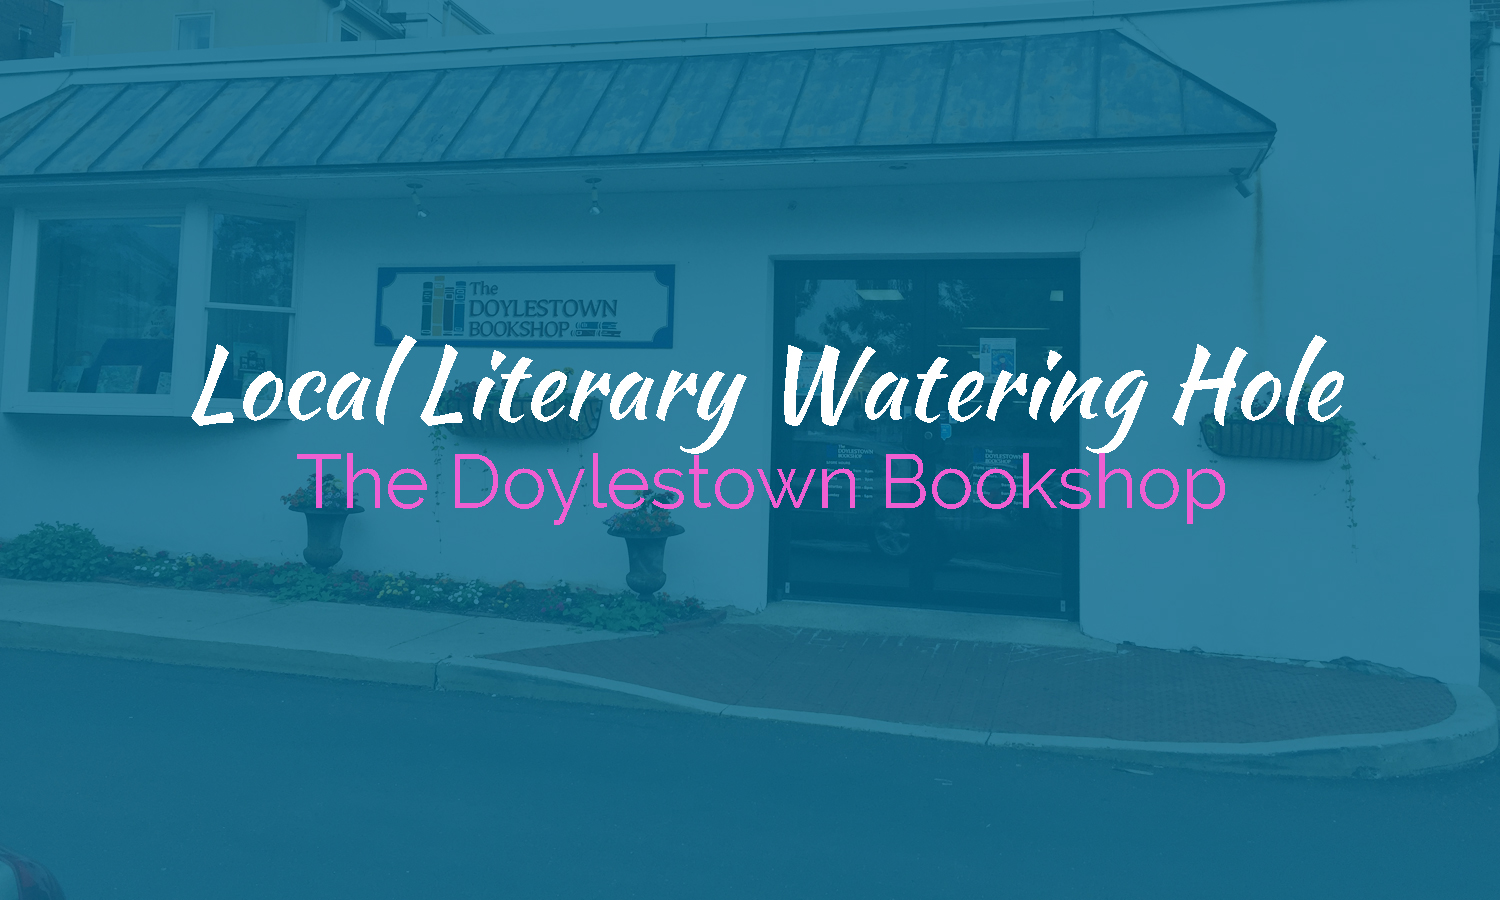 Our trip to the Doylestown Bookstore. It's about 45 minutes from our house, but totally worth the trip!